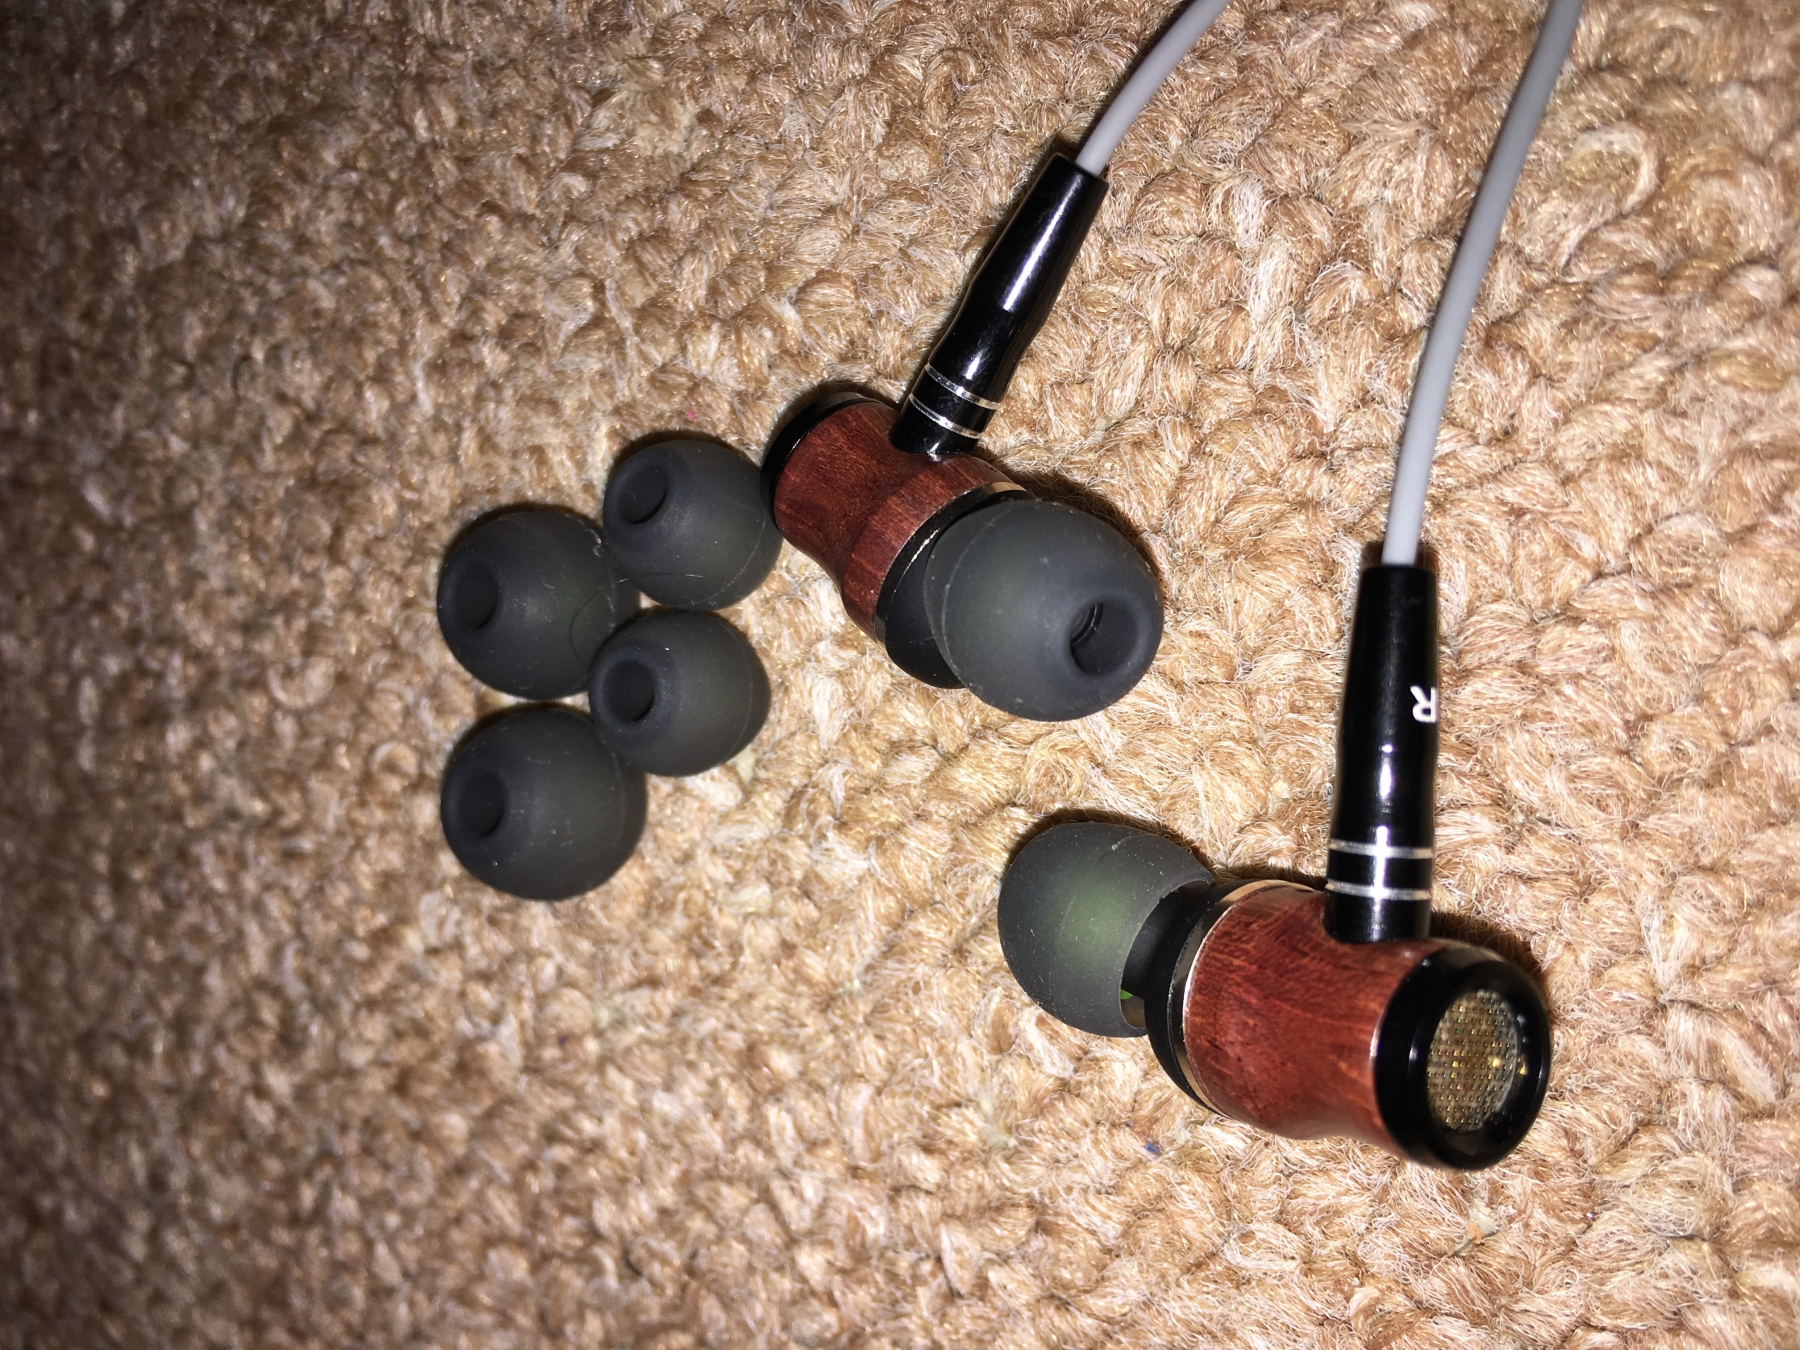 Great audio quality and build